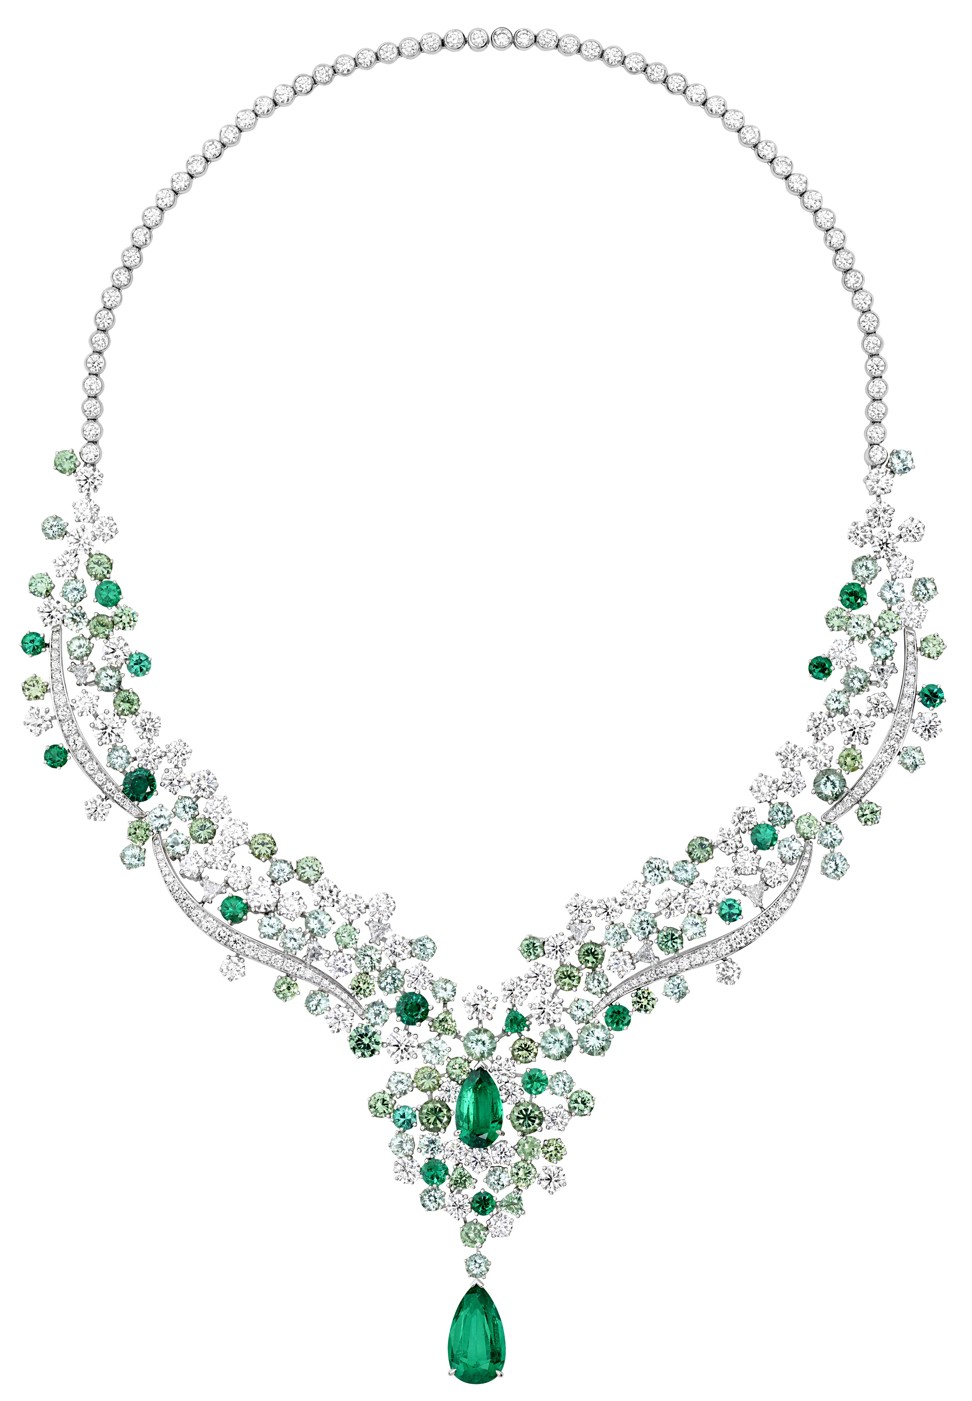 Part of the Sunny Side of Life collection, the 18ct white gold necklace is set with diamonds and different shades of emeralds, HK$4.52 million